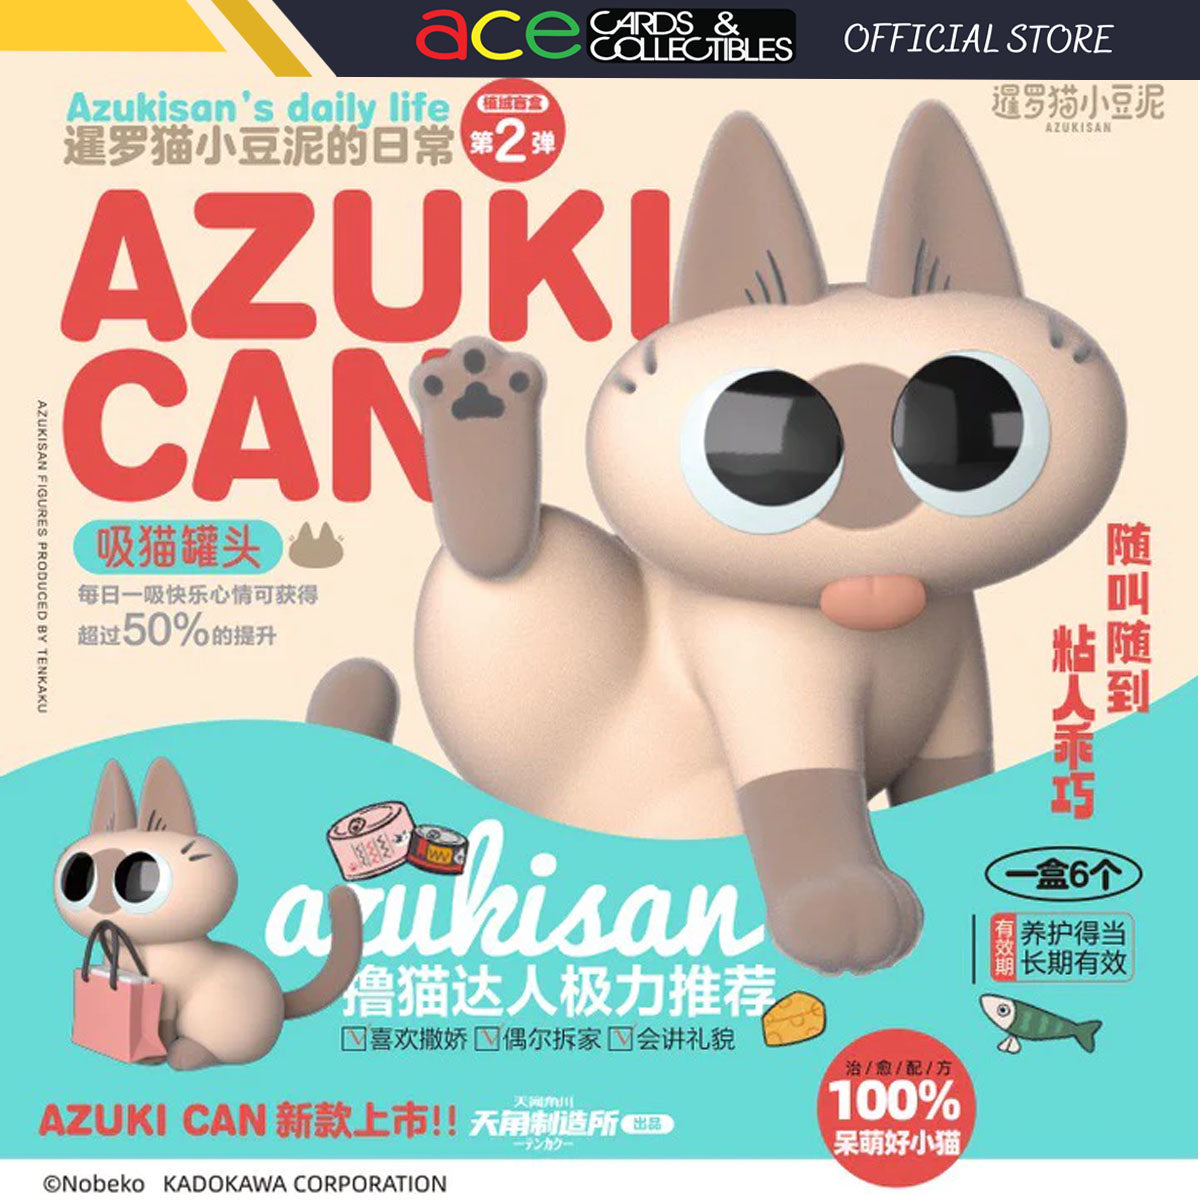 52Toys Azukisan&#39;s Daily Life Ver.2-Display Box (6pcs)-52Toys-Ace Cards &amp; Collectibles